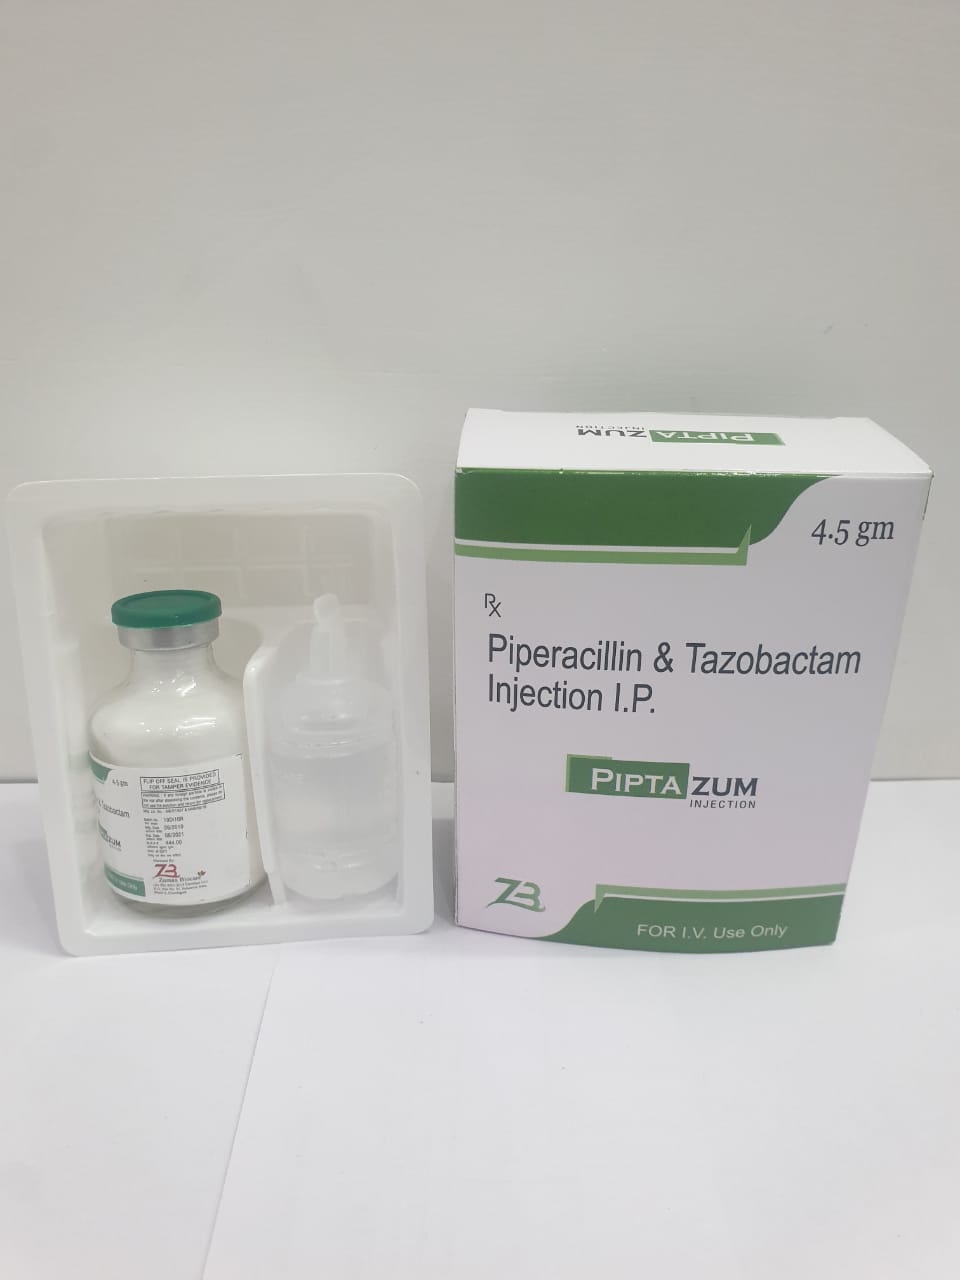 Product Name: Piptazum, Compositions of Piptazum are Piperacillin  & Tazobactam Injection I.P. - Zumax Biocare